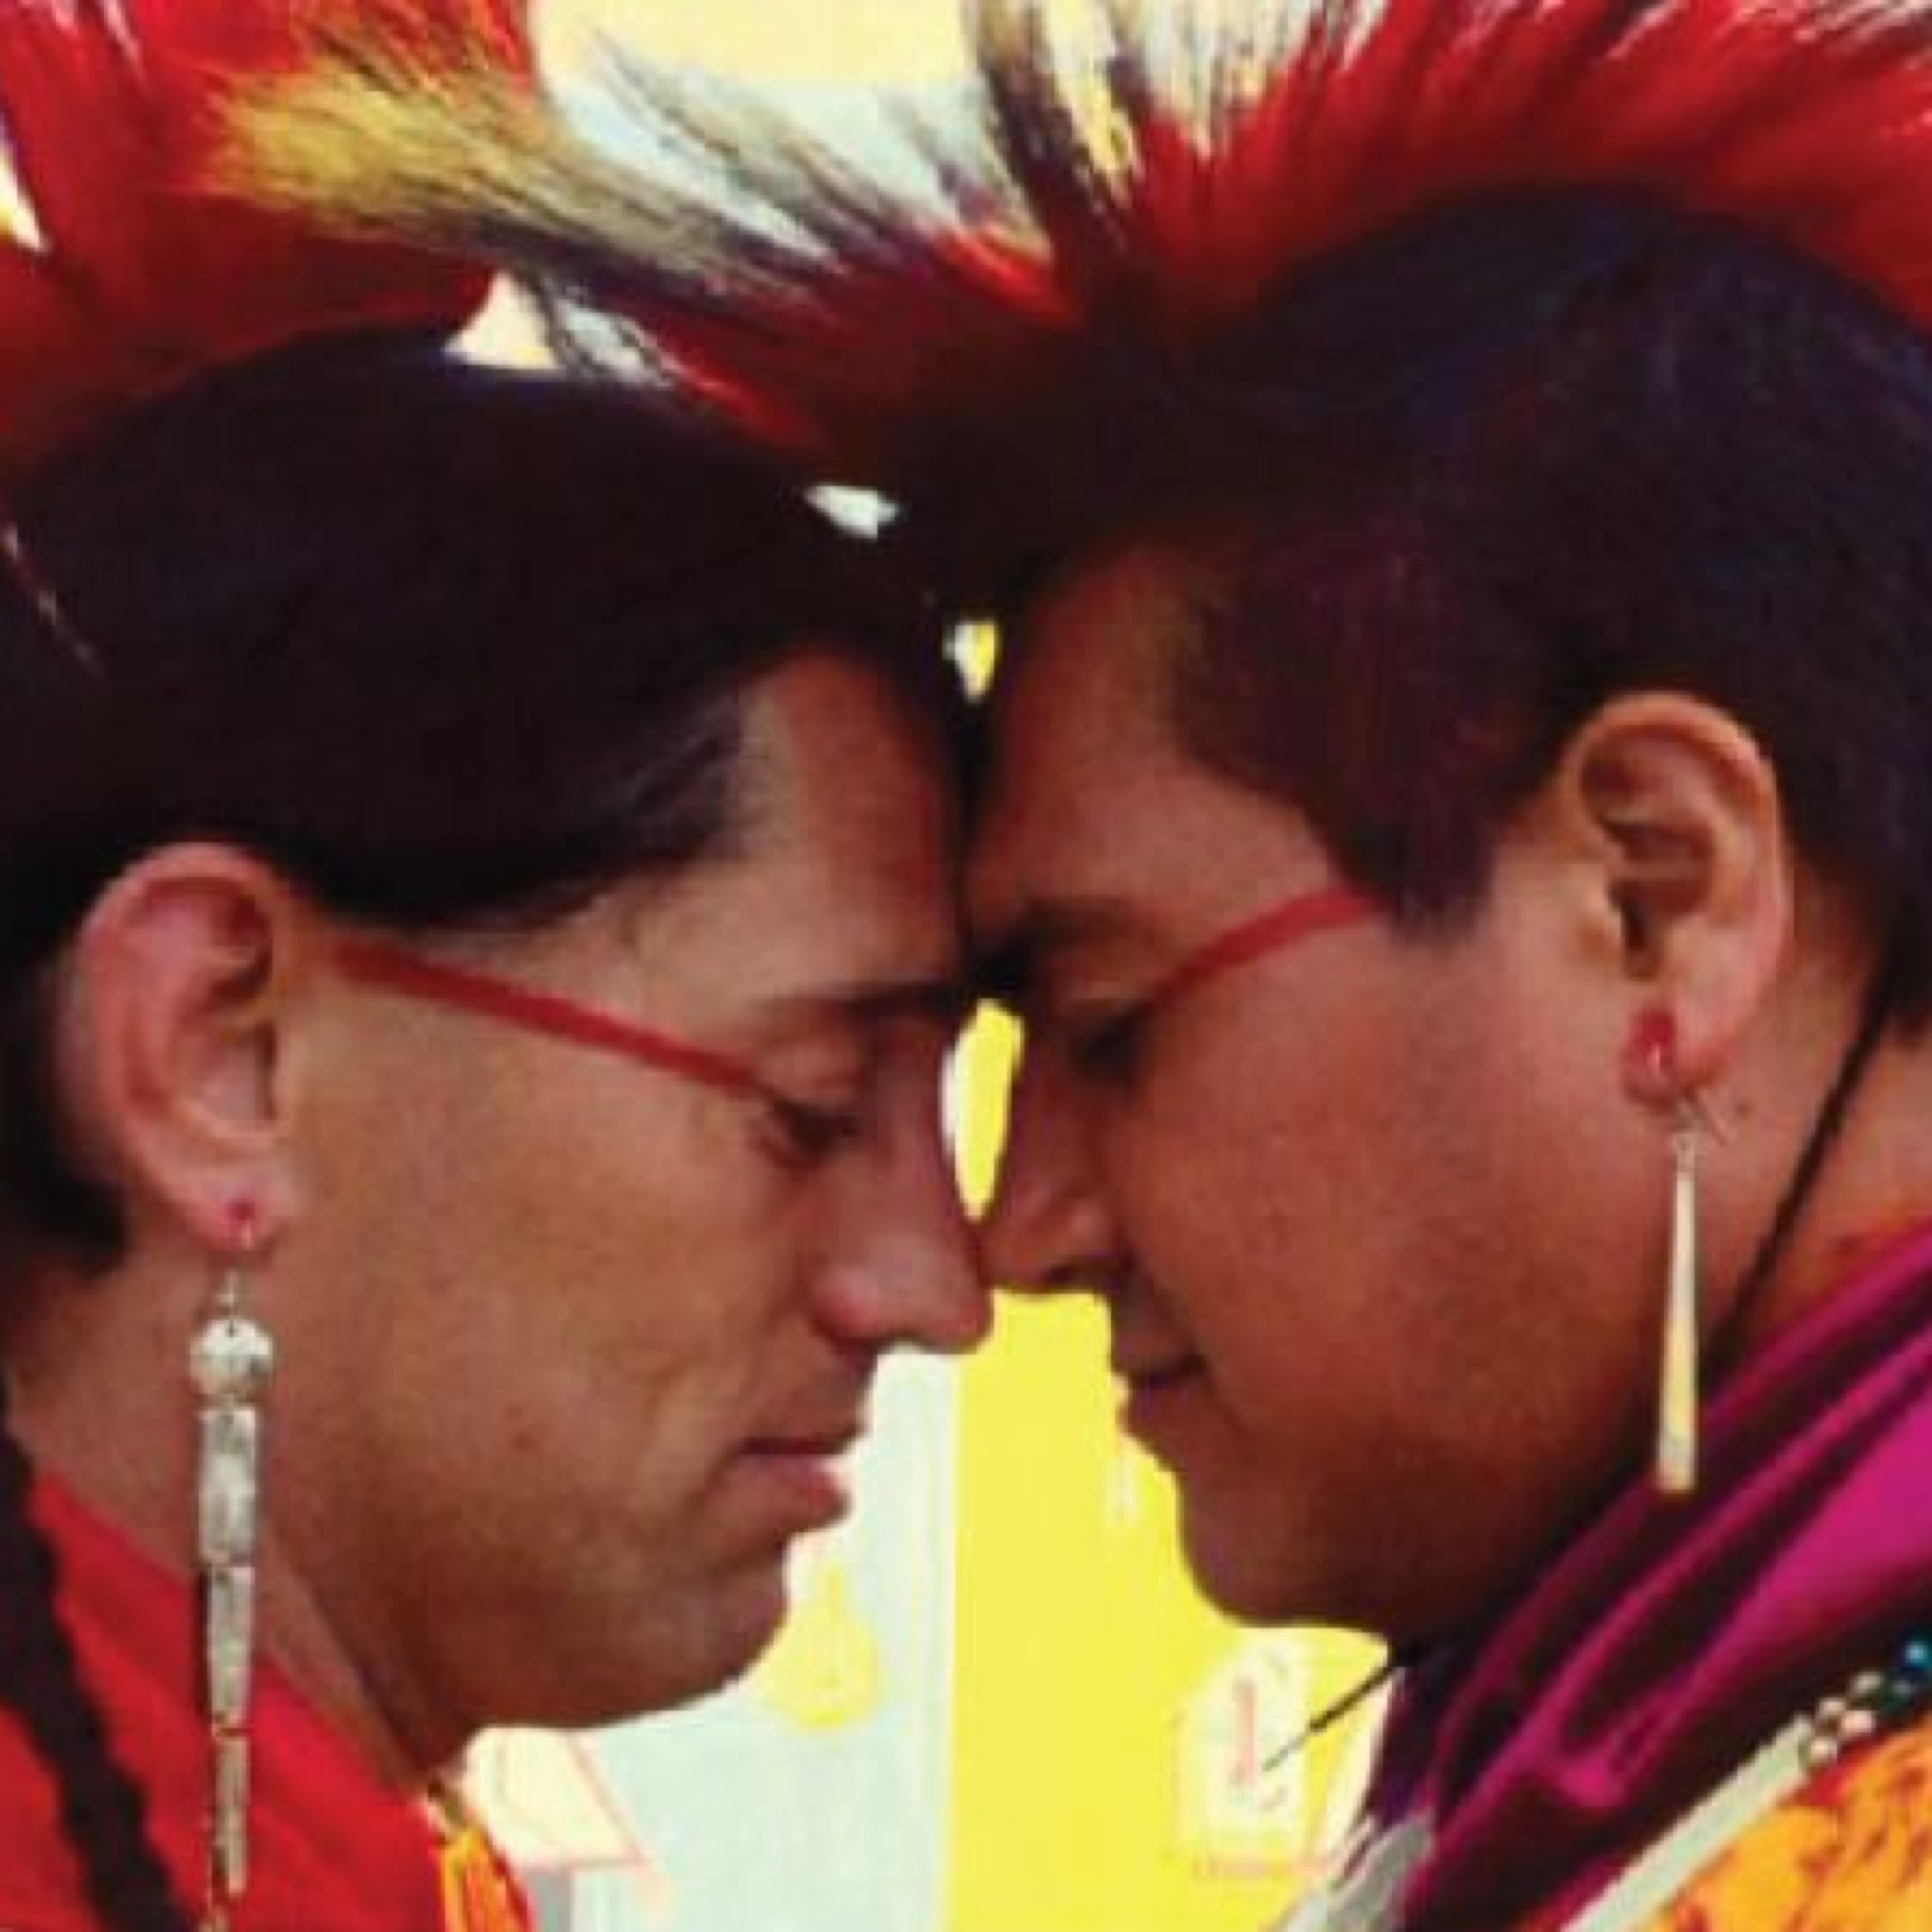 christopher wenzel recommends Native American Lesbian Sex